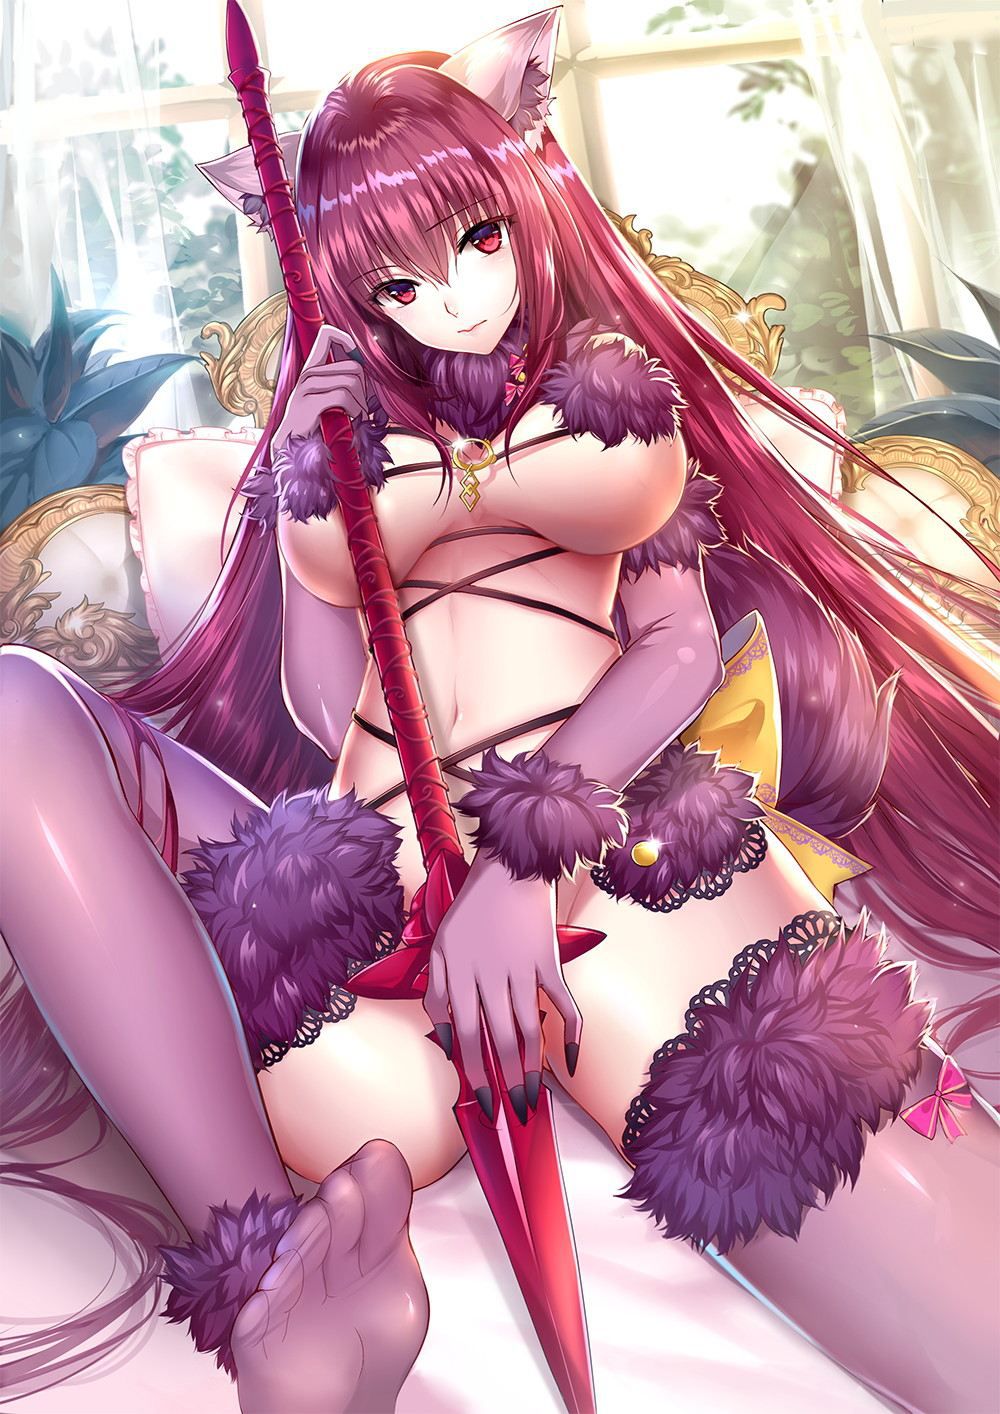 I tried to collect the erotic images of Fate Grand order 5